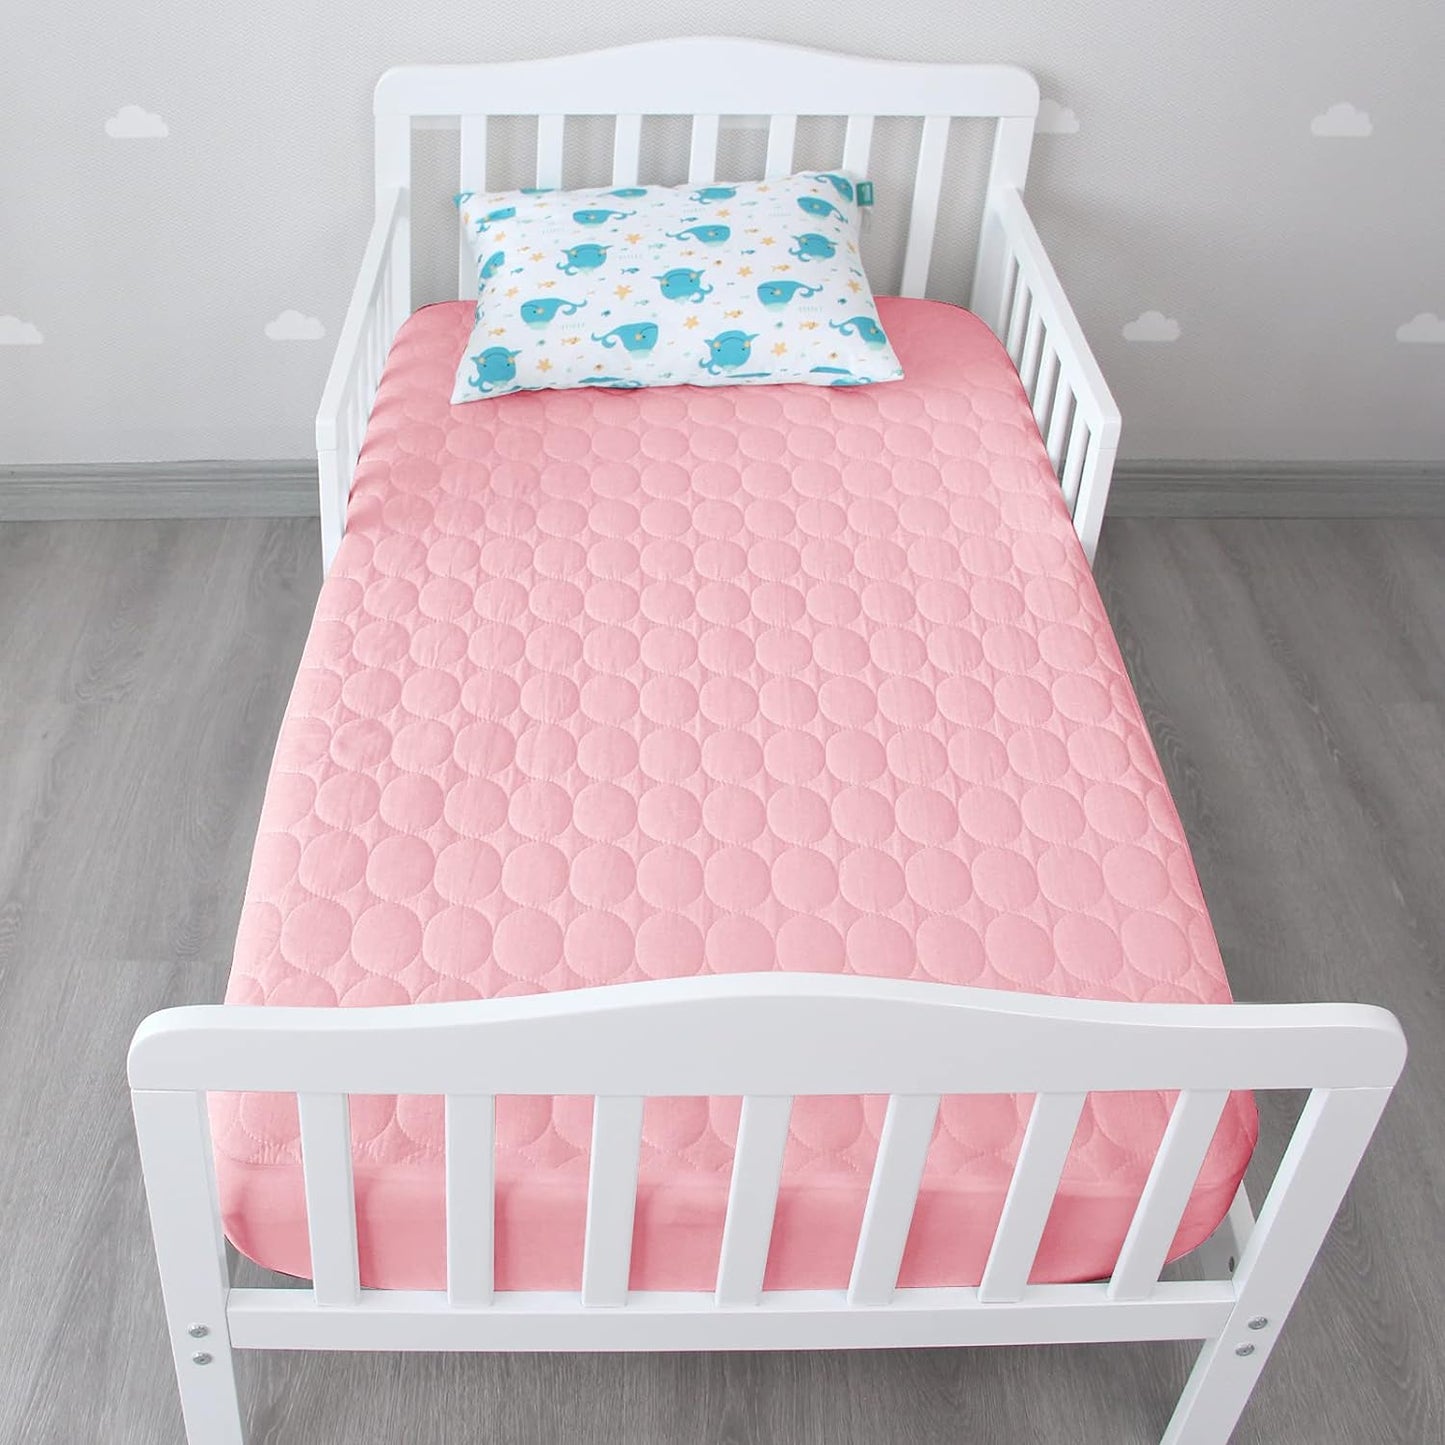 Crib Mattress Protector/ Pad Cover - Quilted Microfiber, Waterproof (for Standard Crib/ Toddler Bed)